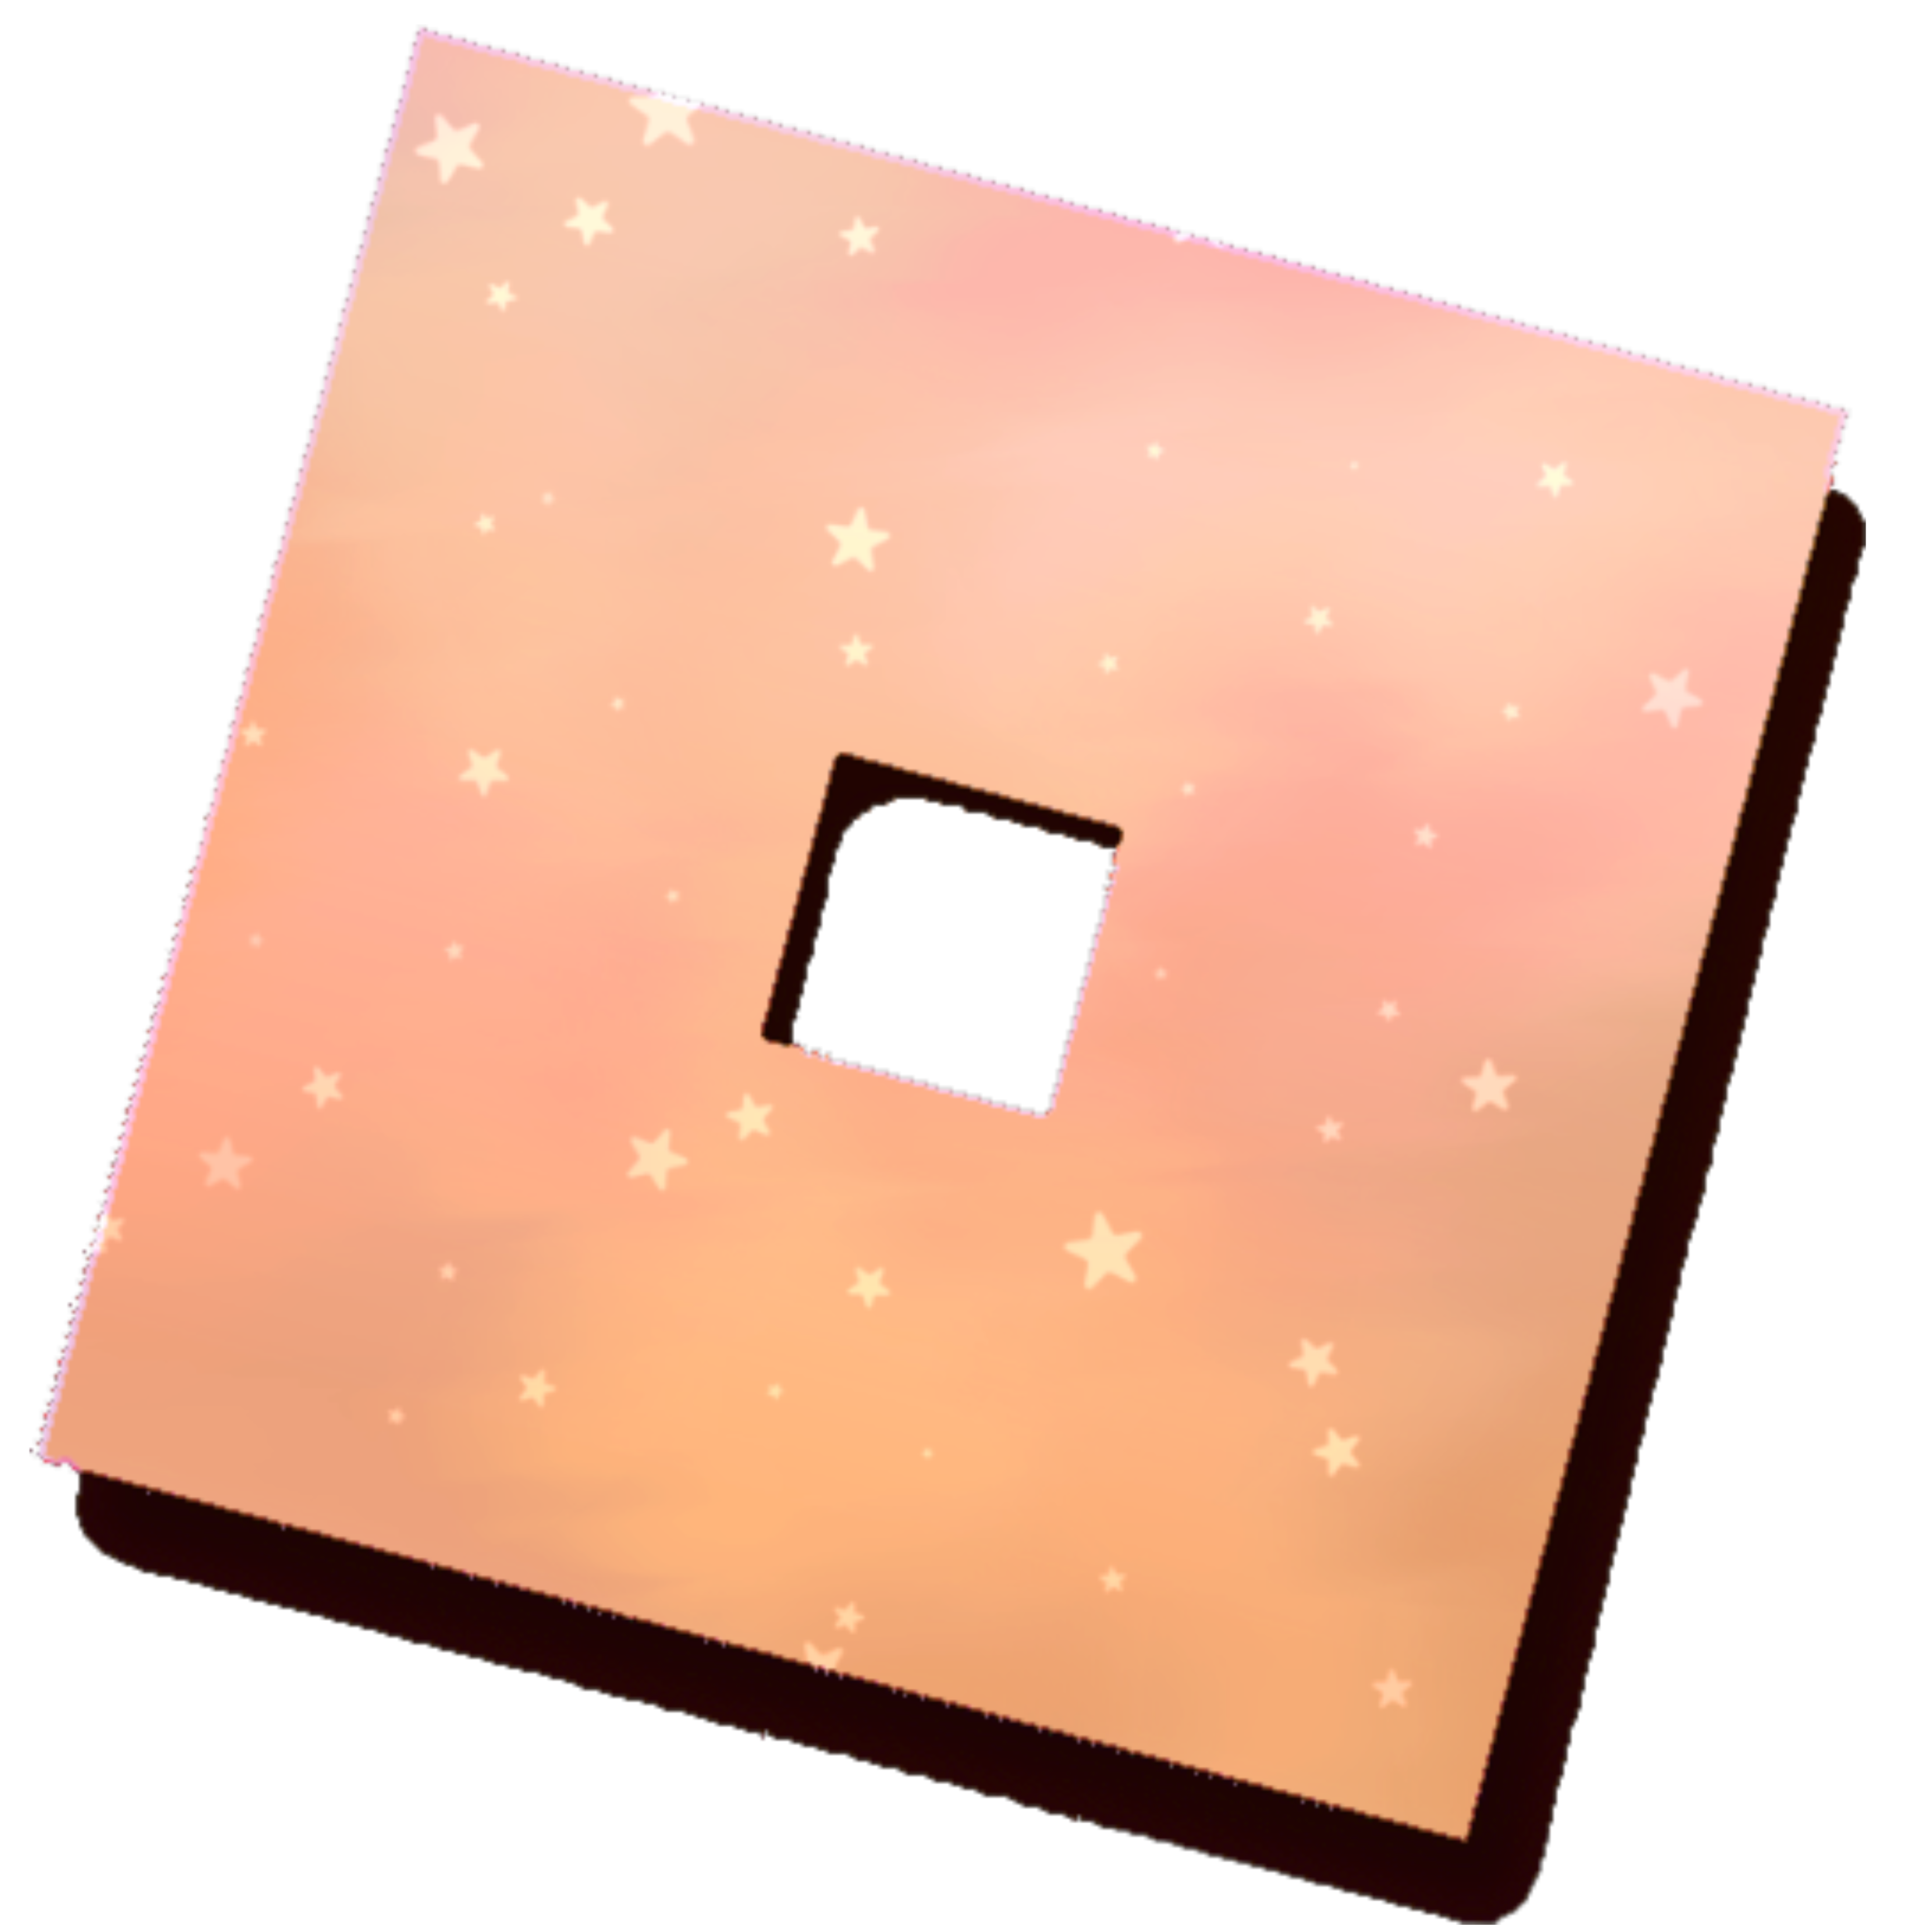 Sticker By That Girl That Got Famous With Stickers - logo aesthetic roblox pics